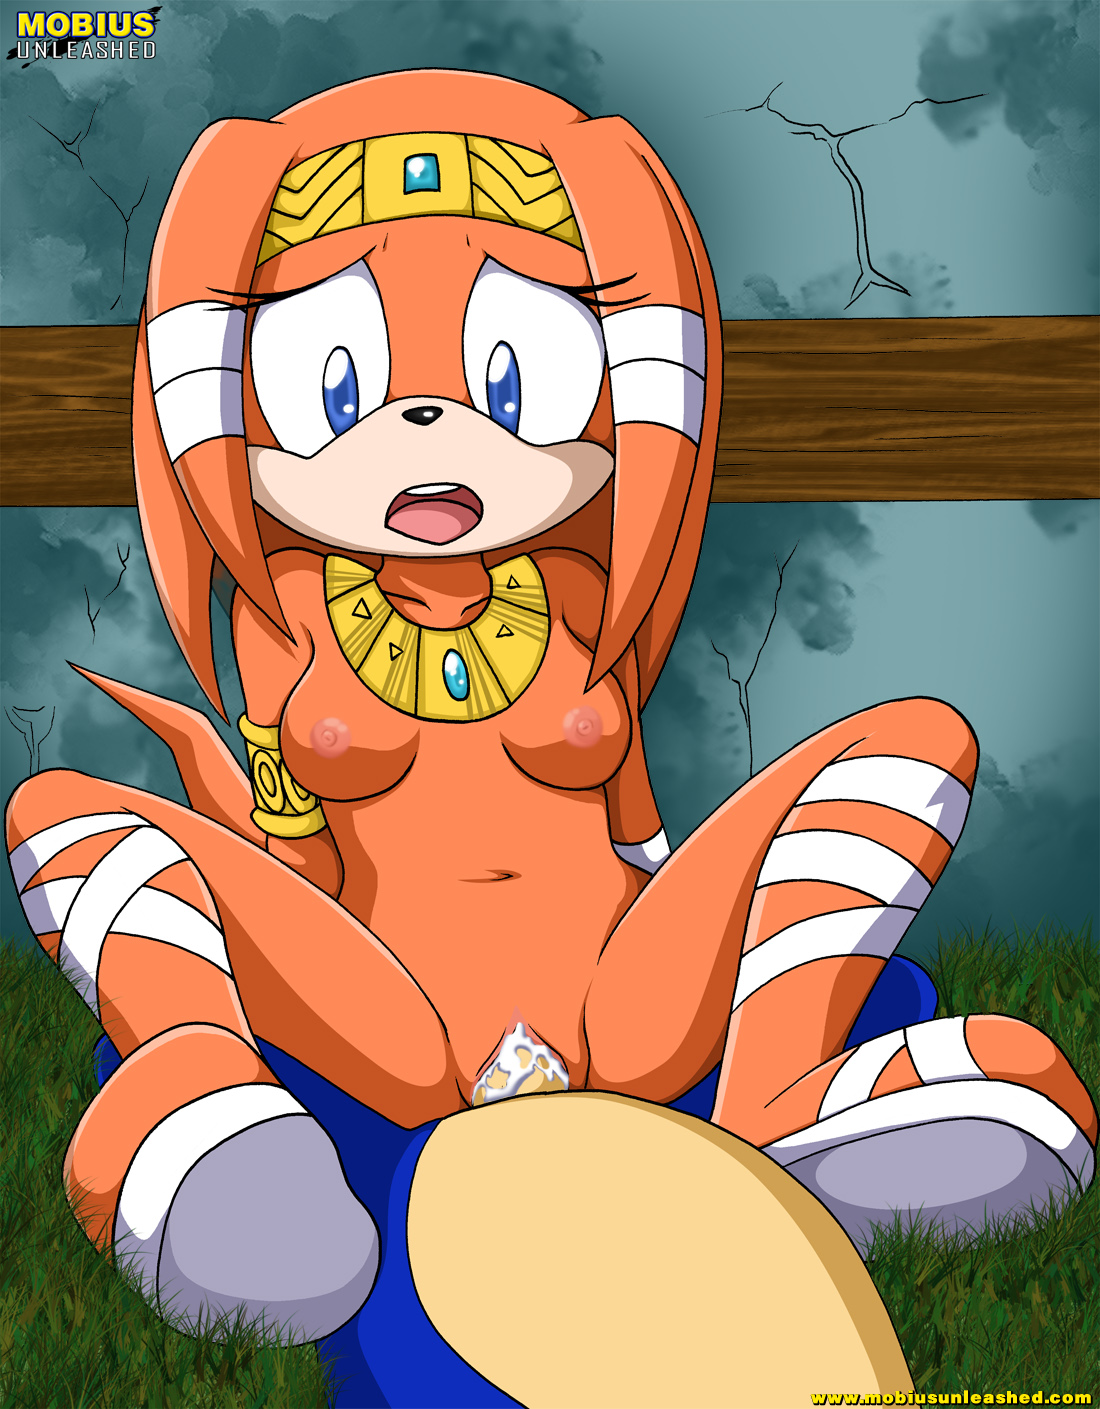 Mobius Unleashed: Tikal the Echidna.